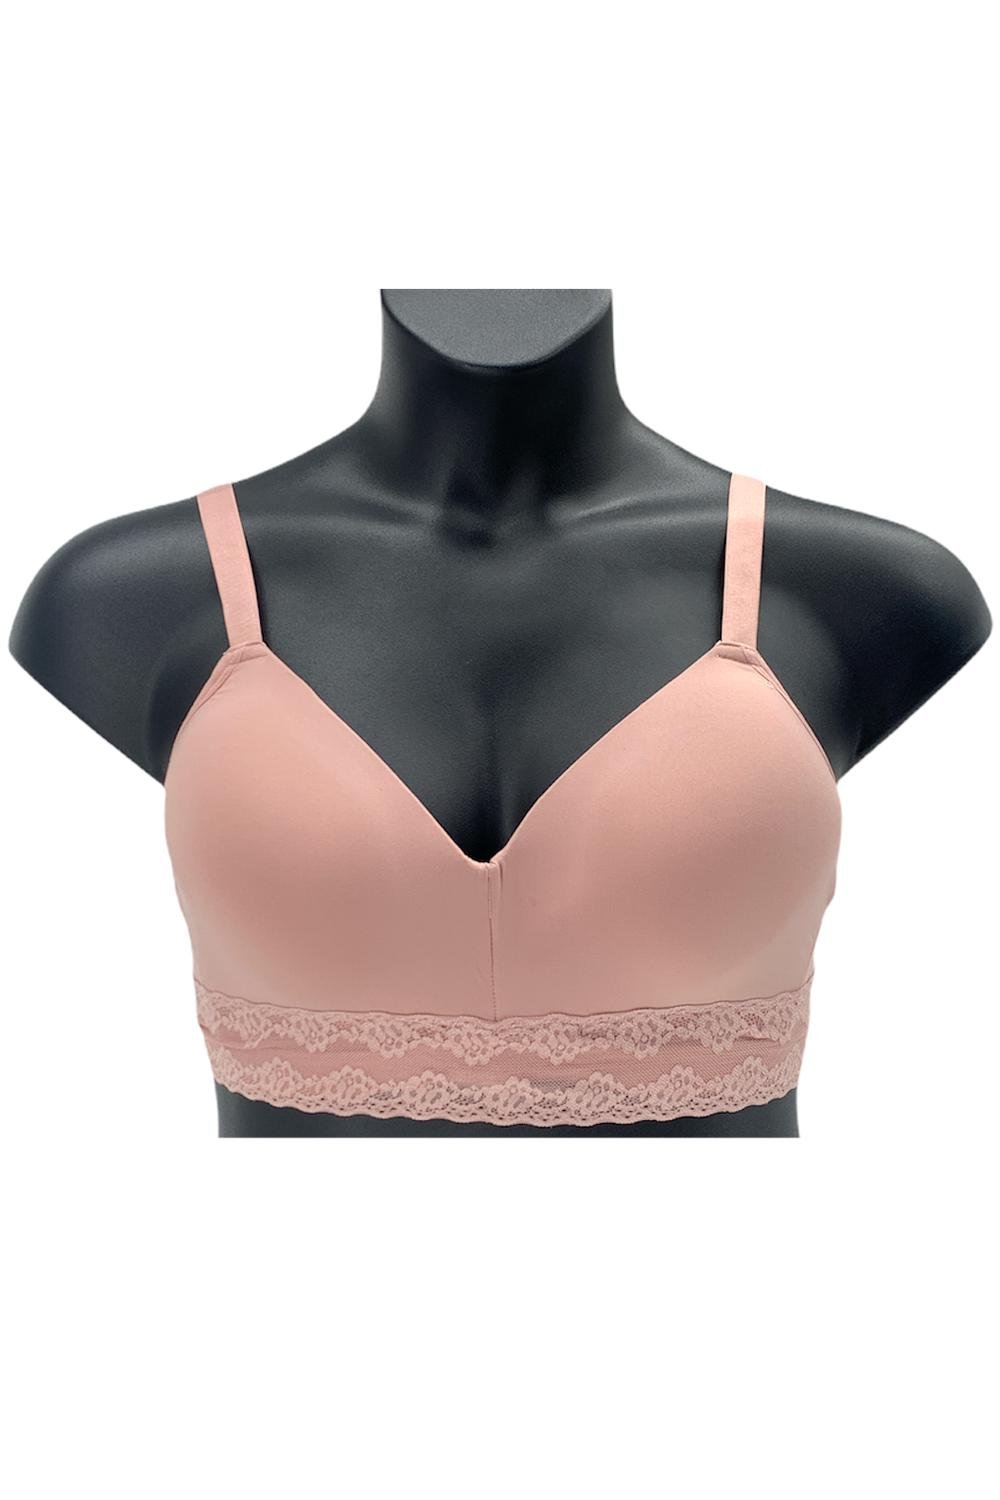 Breezies Seamless Long Line Wirefree Contour Bra Lace Band Rose Mauve